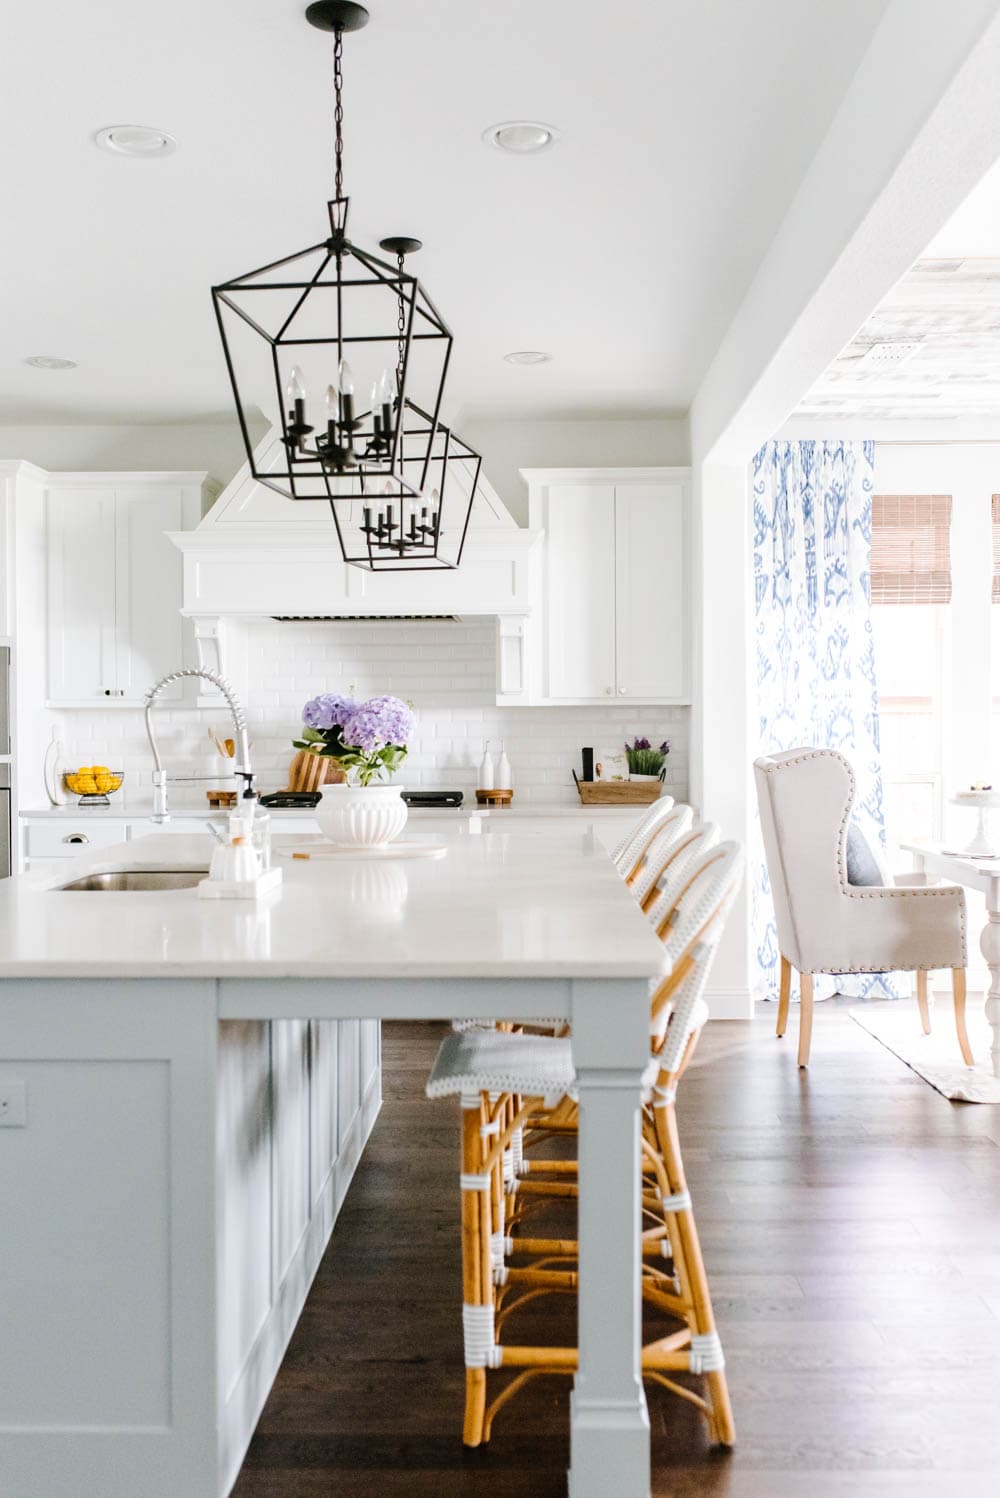 Bring summer décor into your kitchen with these fresh and simple summer kitchen decorating ideas. #ABlissfulNest #summerhomedecor #summerstyle